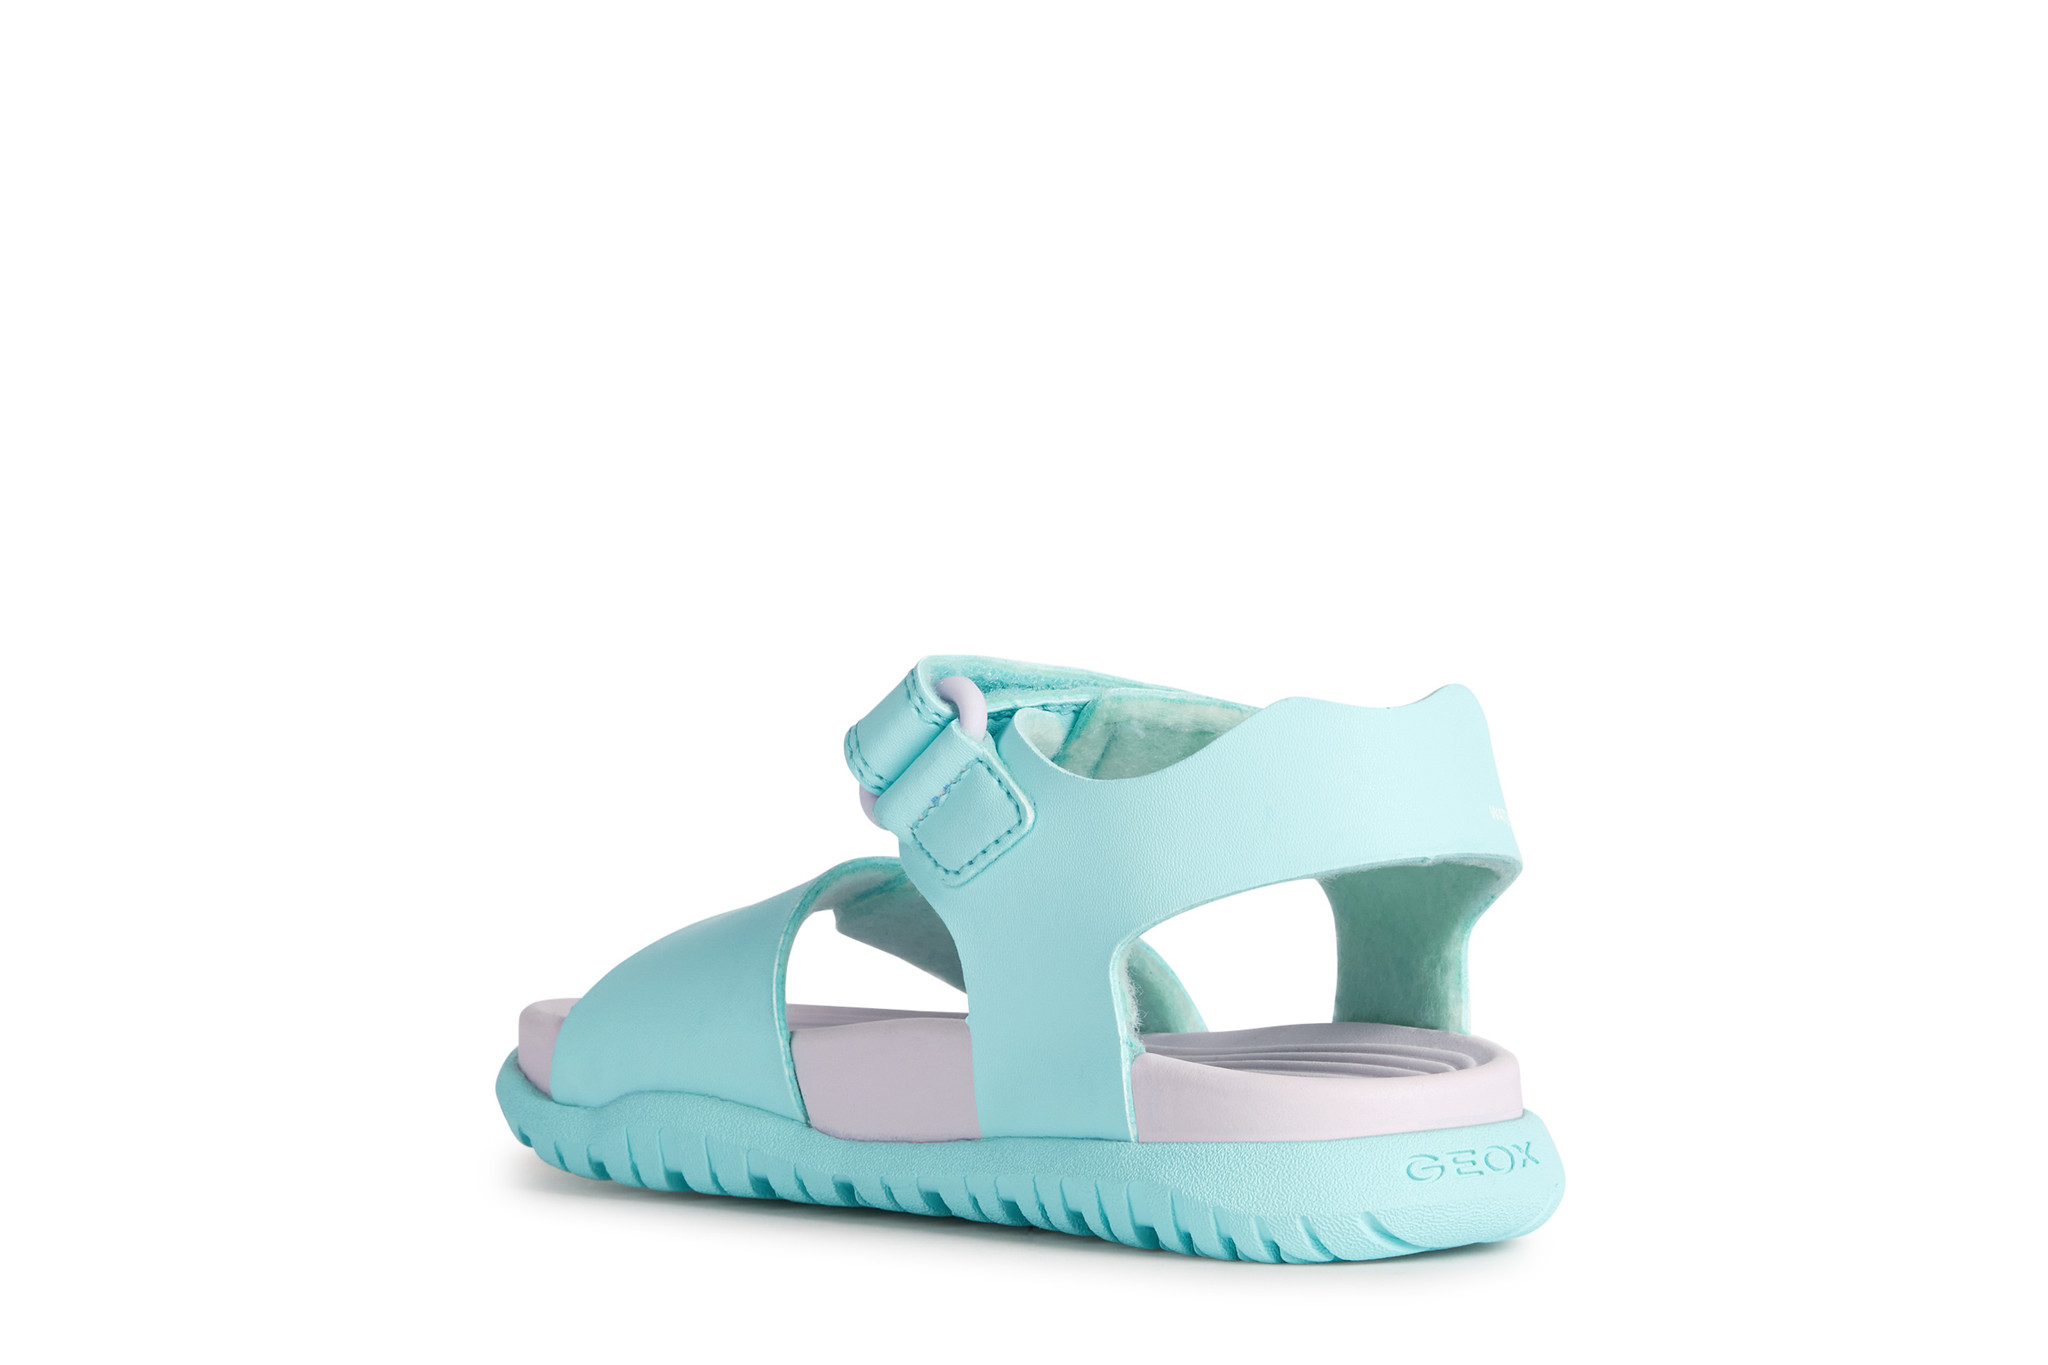 Geox Fusbetto Watersea/Lilac